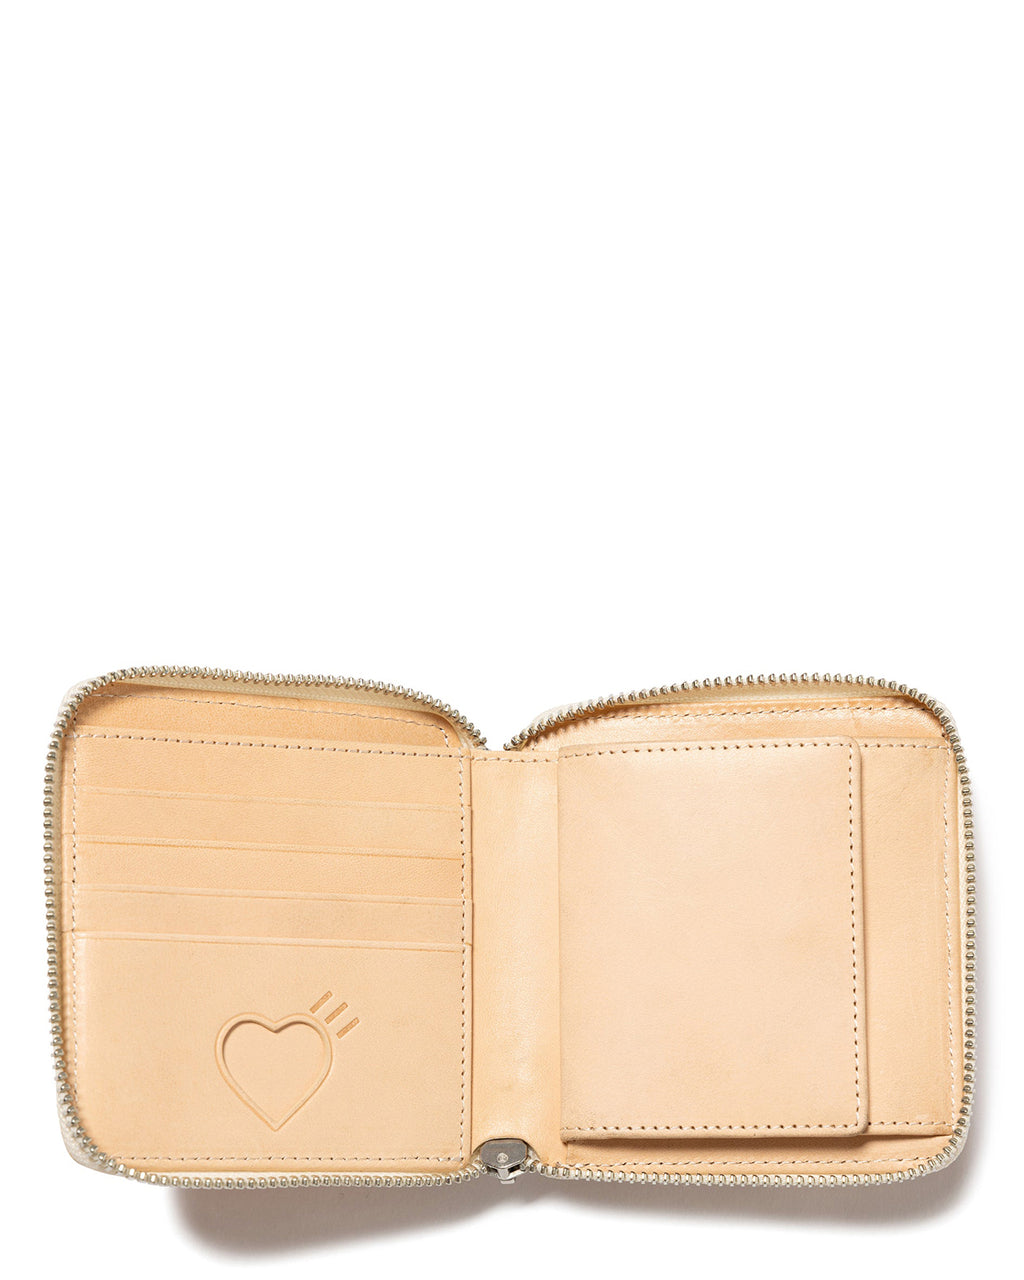 Human Made Leather Wallet, Beige